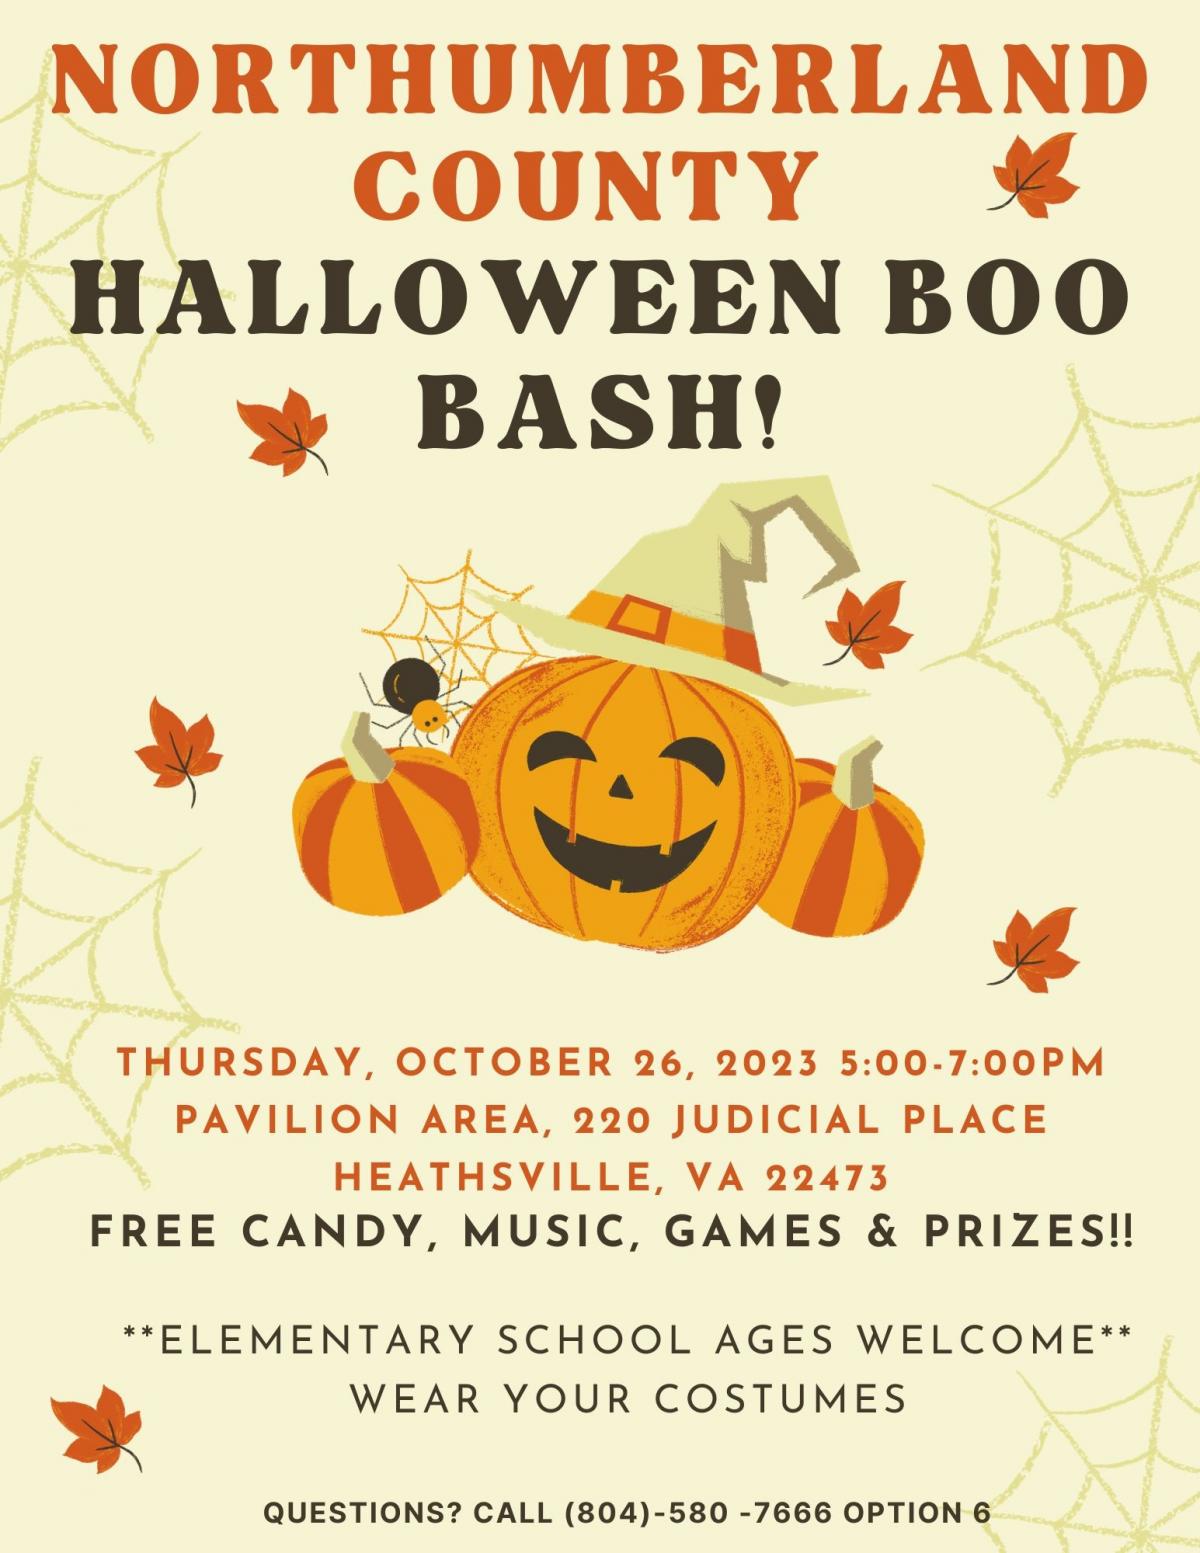 Northumberland County Boo Bash!  October 26, 2023, 5:00 - 7:00 p.m. at the Pavilion located at 220 Judicial Place, Heathsville